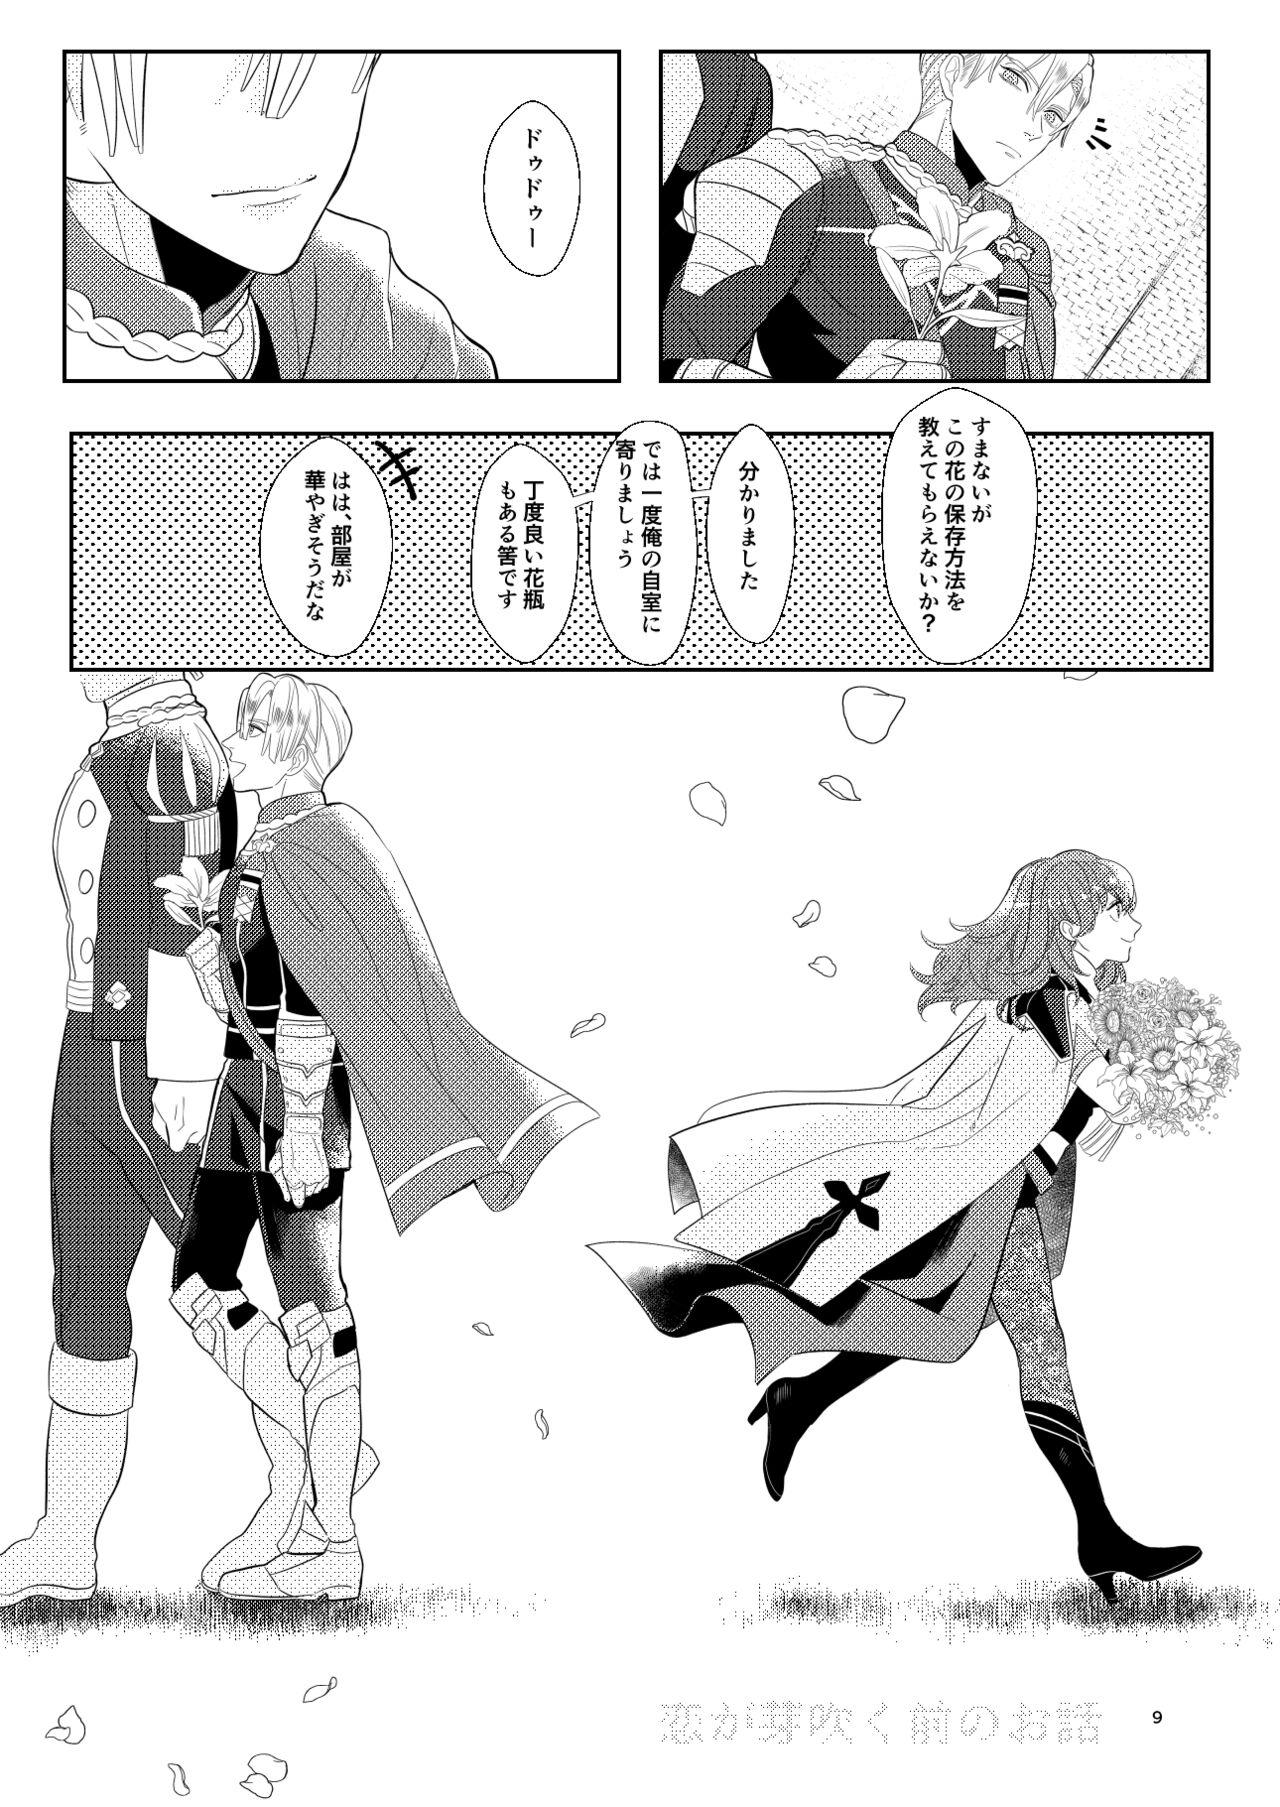 High Definition Kimi to Tsuki made - Fire emblem three houses Audition - Page 8